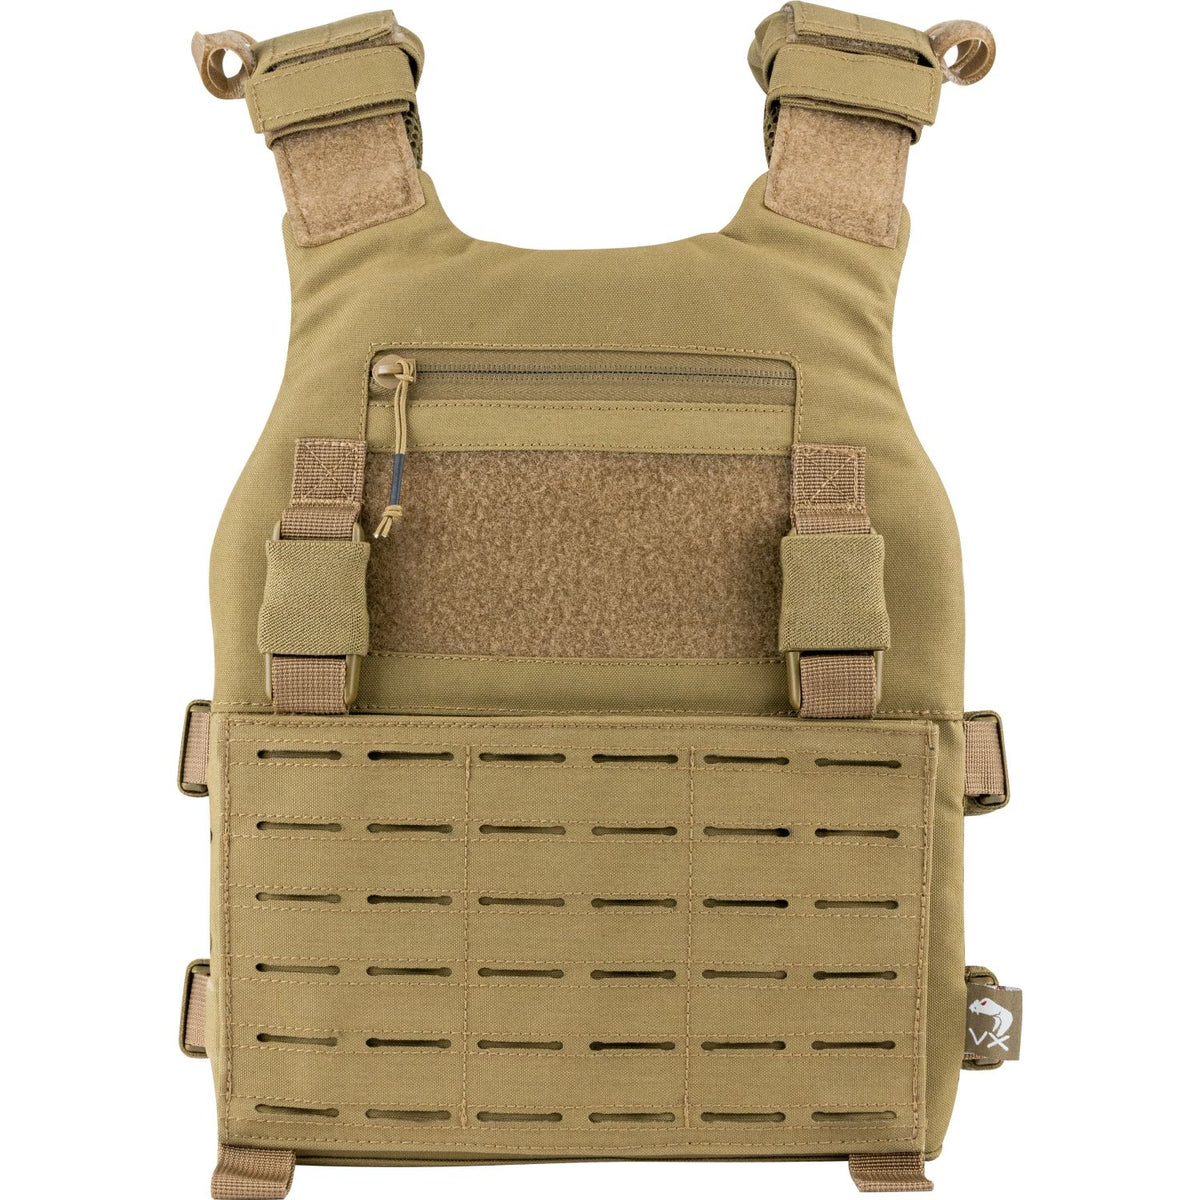 Viper VX Buckle Up Plate Carrier GEN2 - Coyote